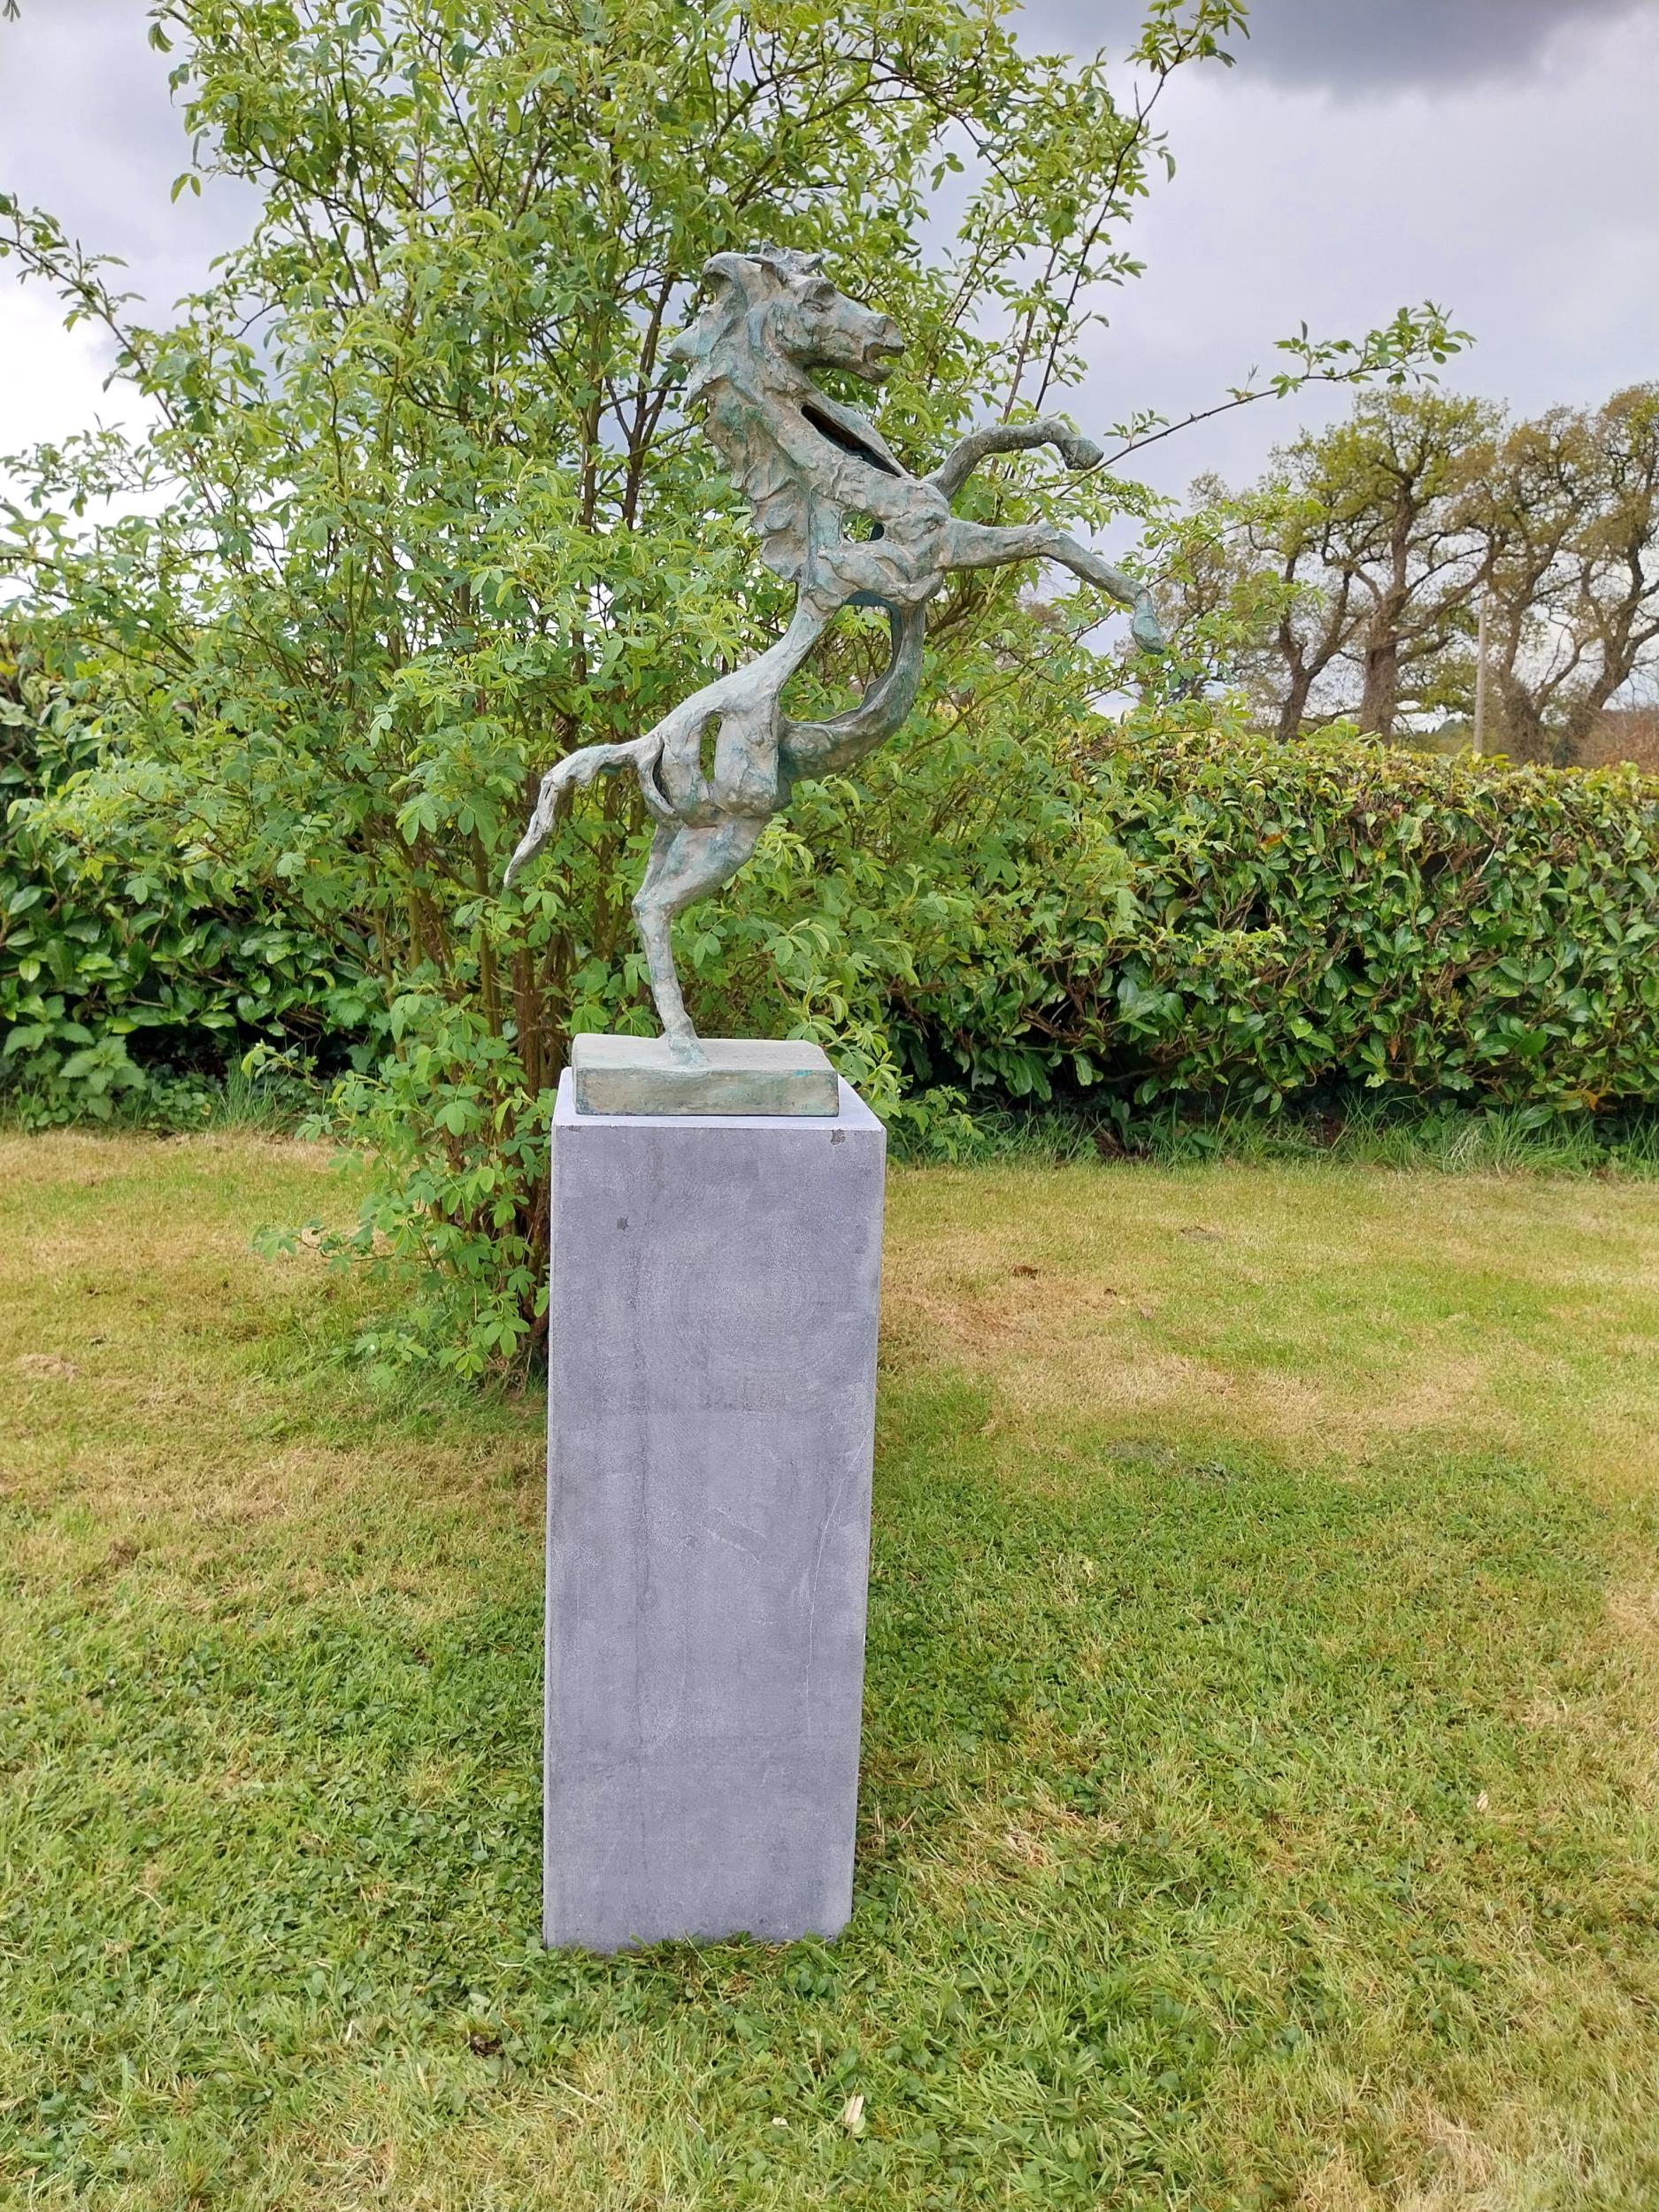 Exceptional quality contemporary bronze sculpture 'The Rearing Horse' raised on slate plinth {